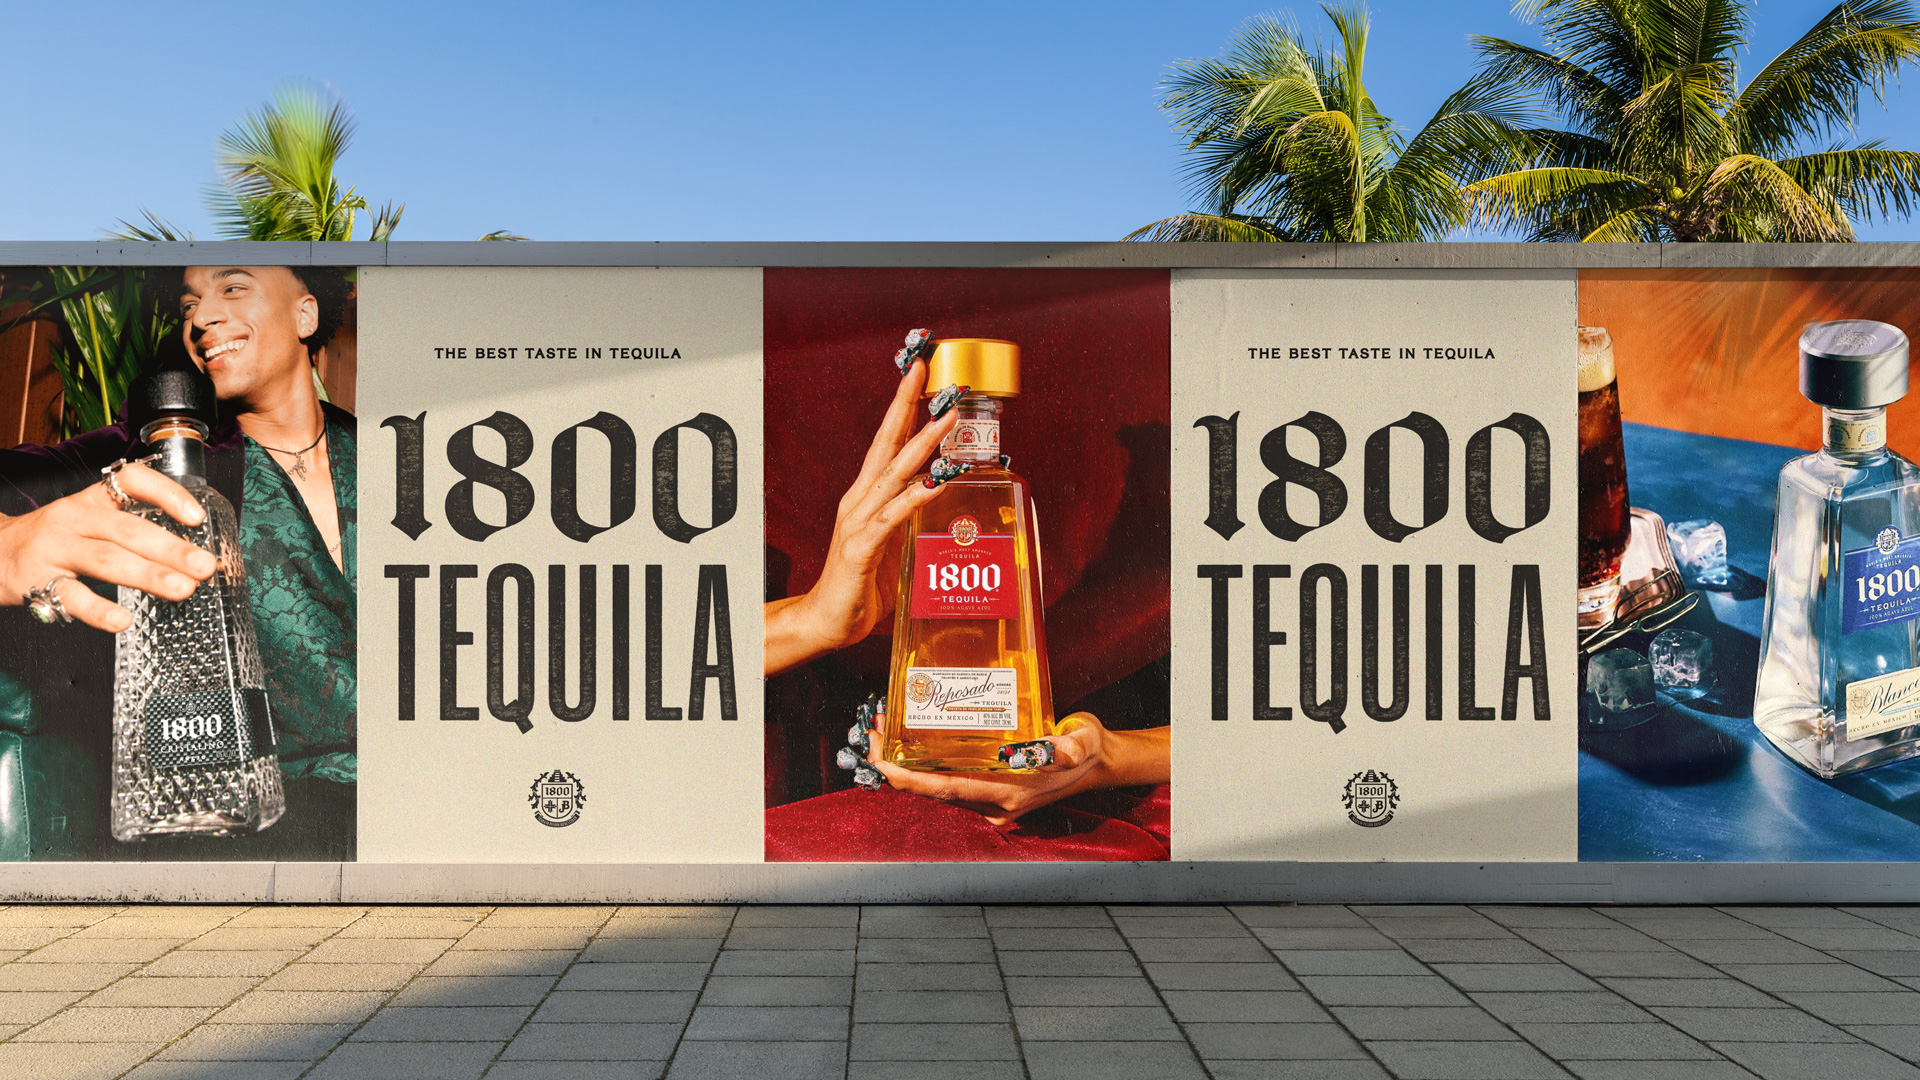 1800 Tequila wild posting with blackletter and condensed typography.